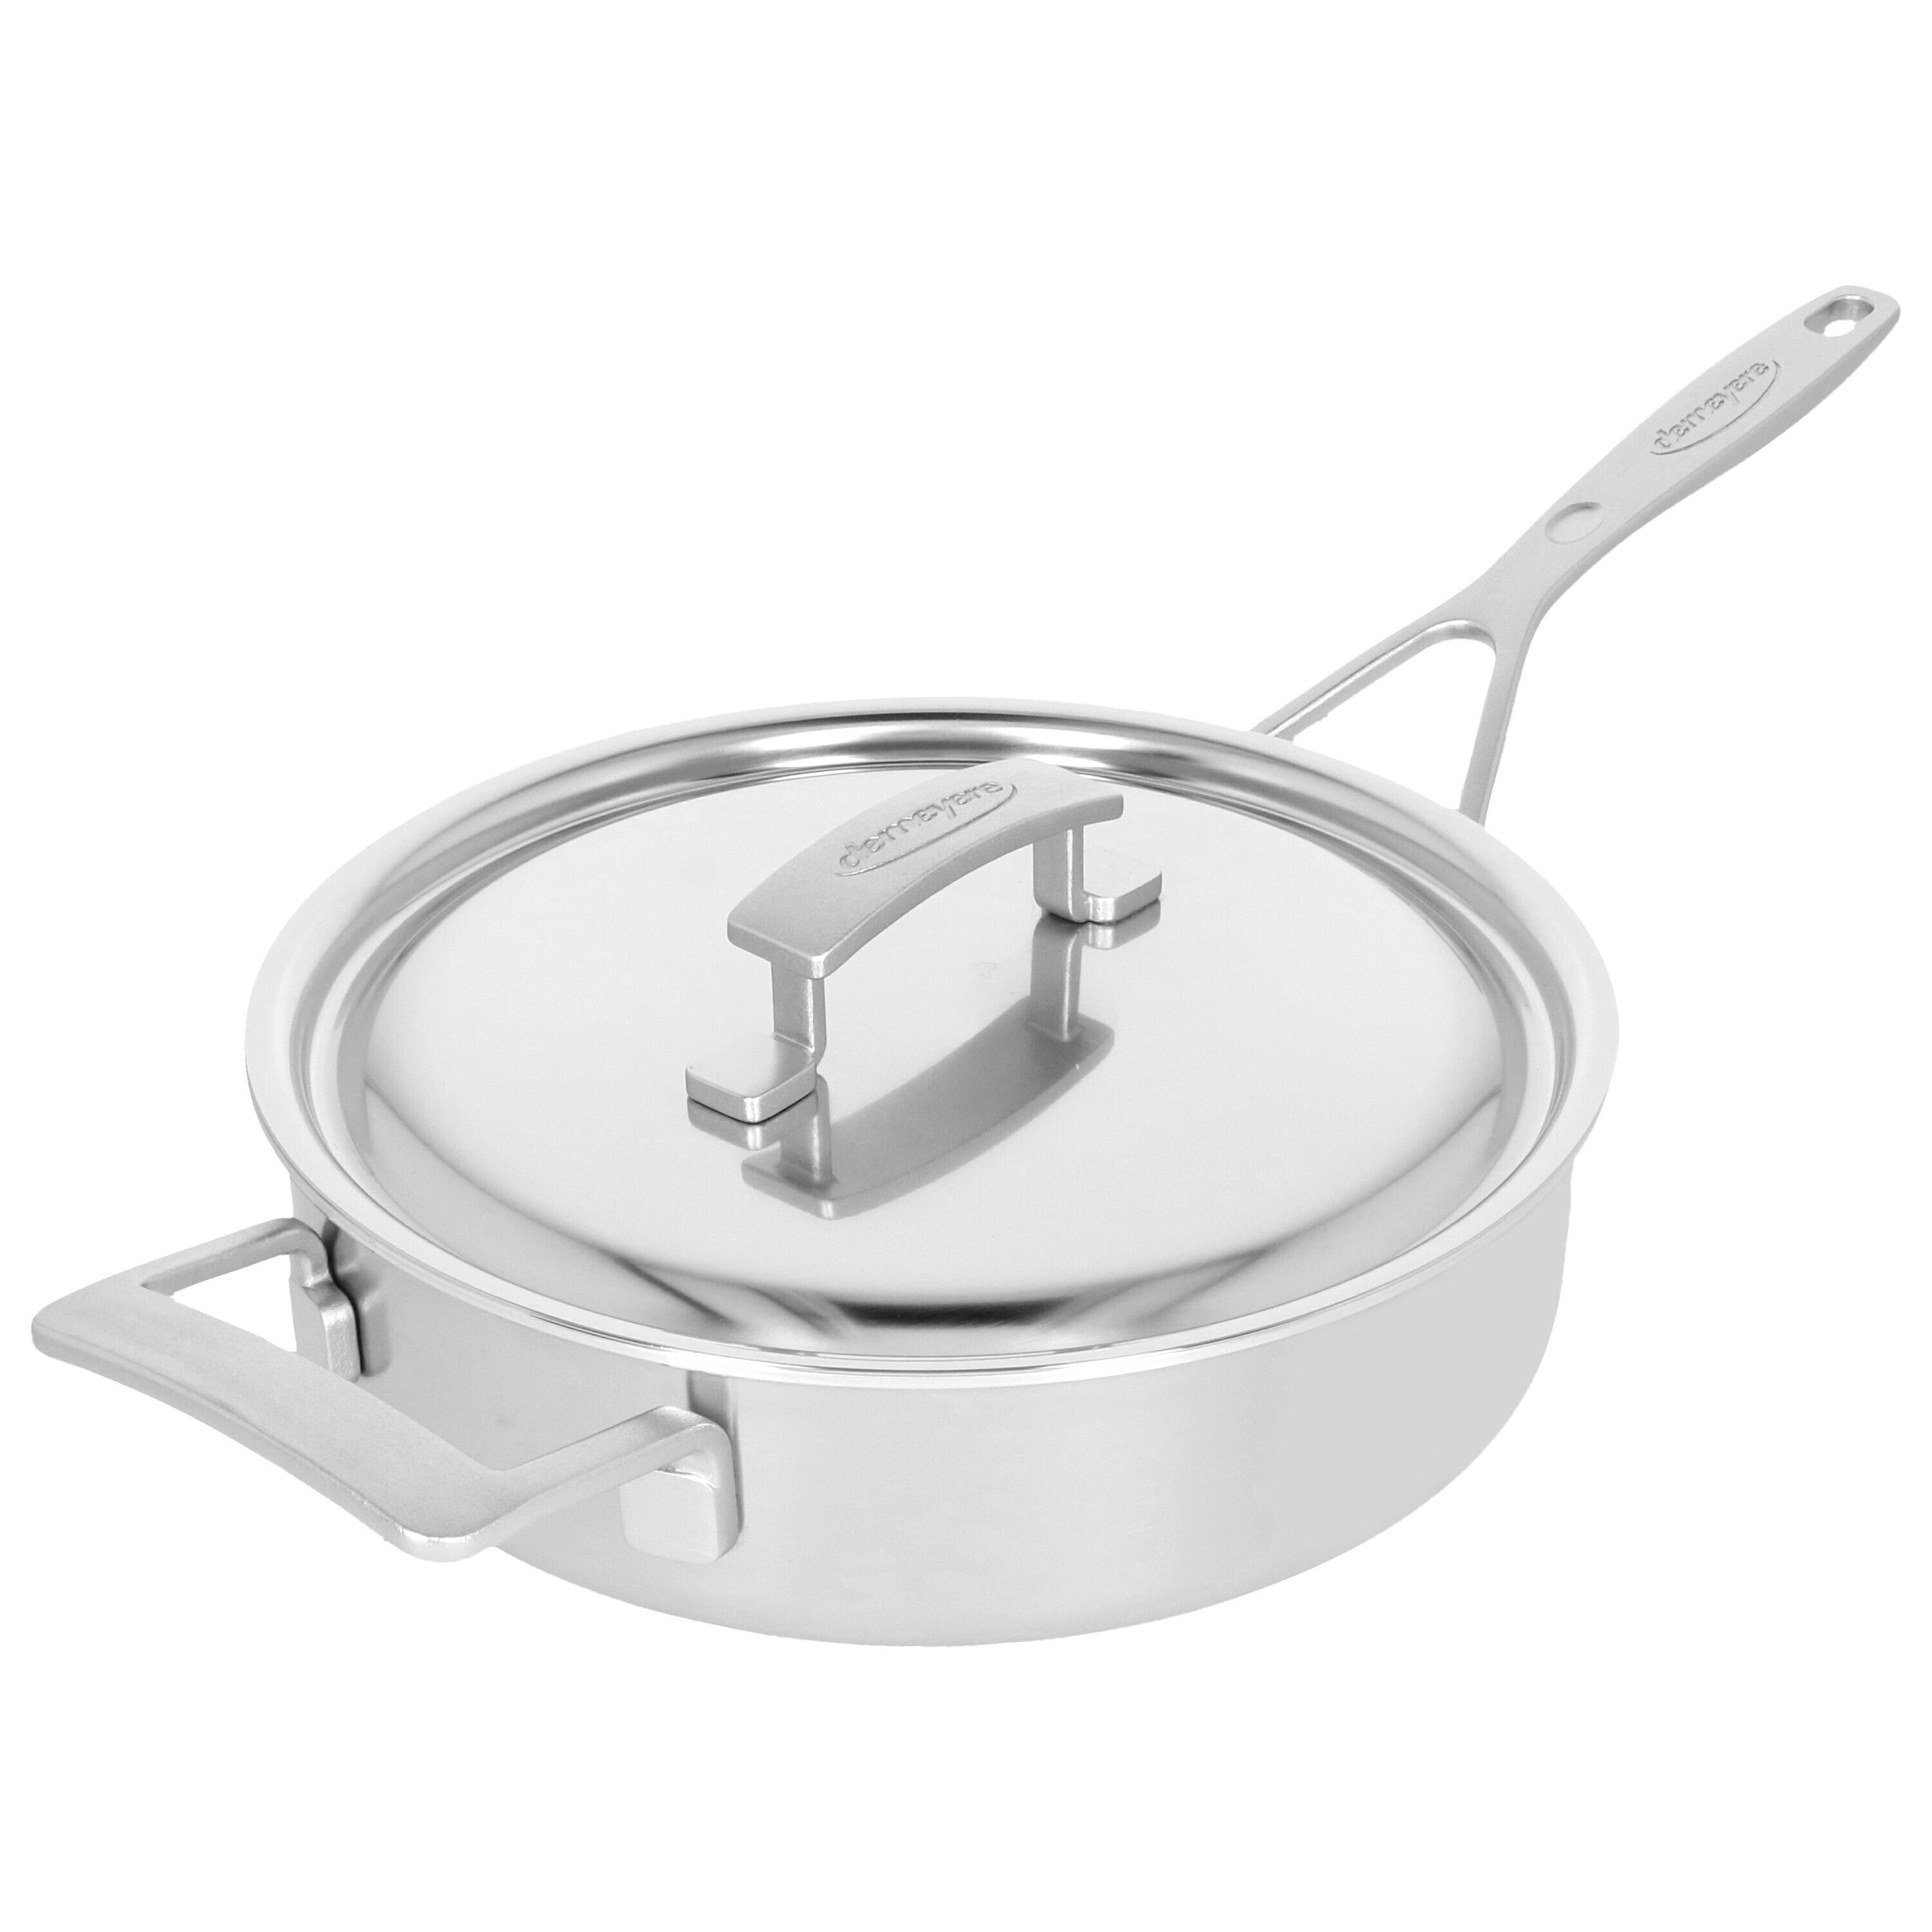 Water Pan, Full Size, 4 Deep, Stainless Steel, Dripless